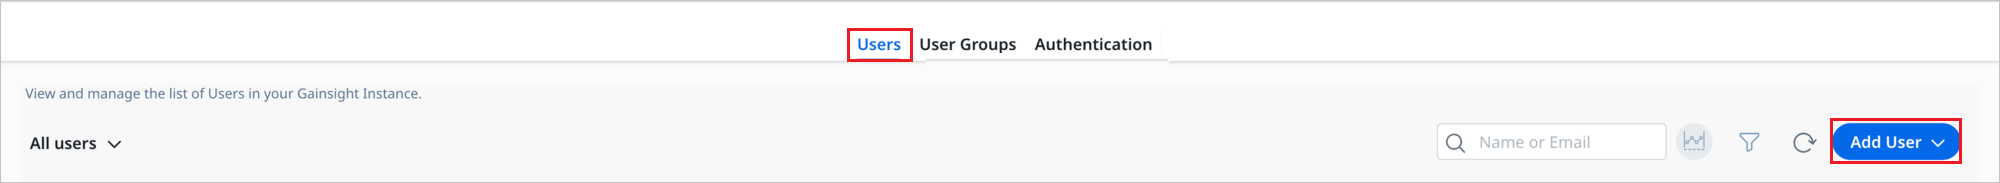 Screenshot shows how to add users in Gainsight.